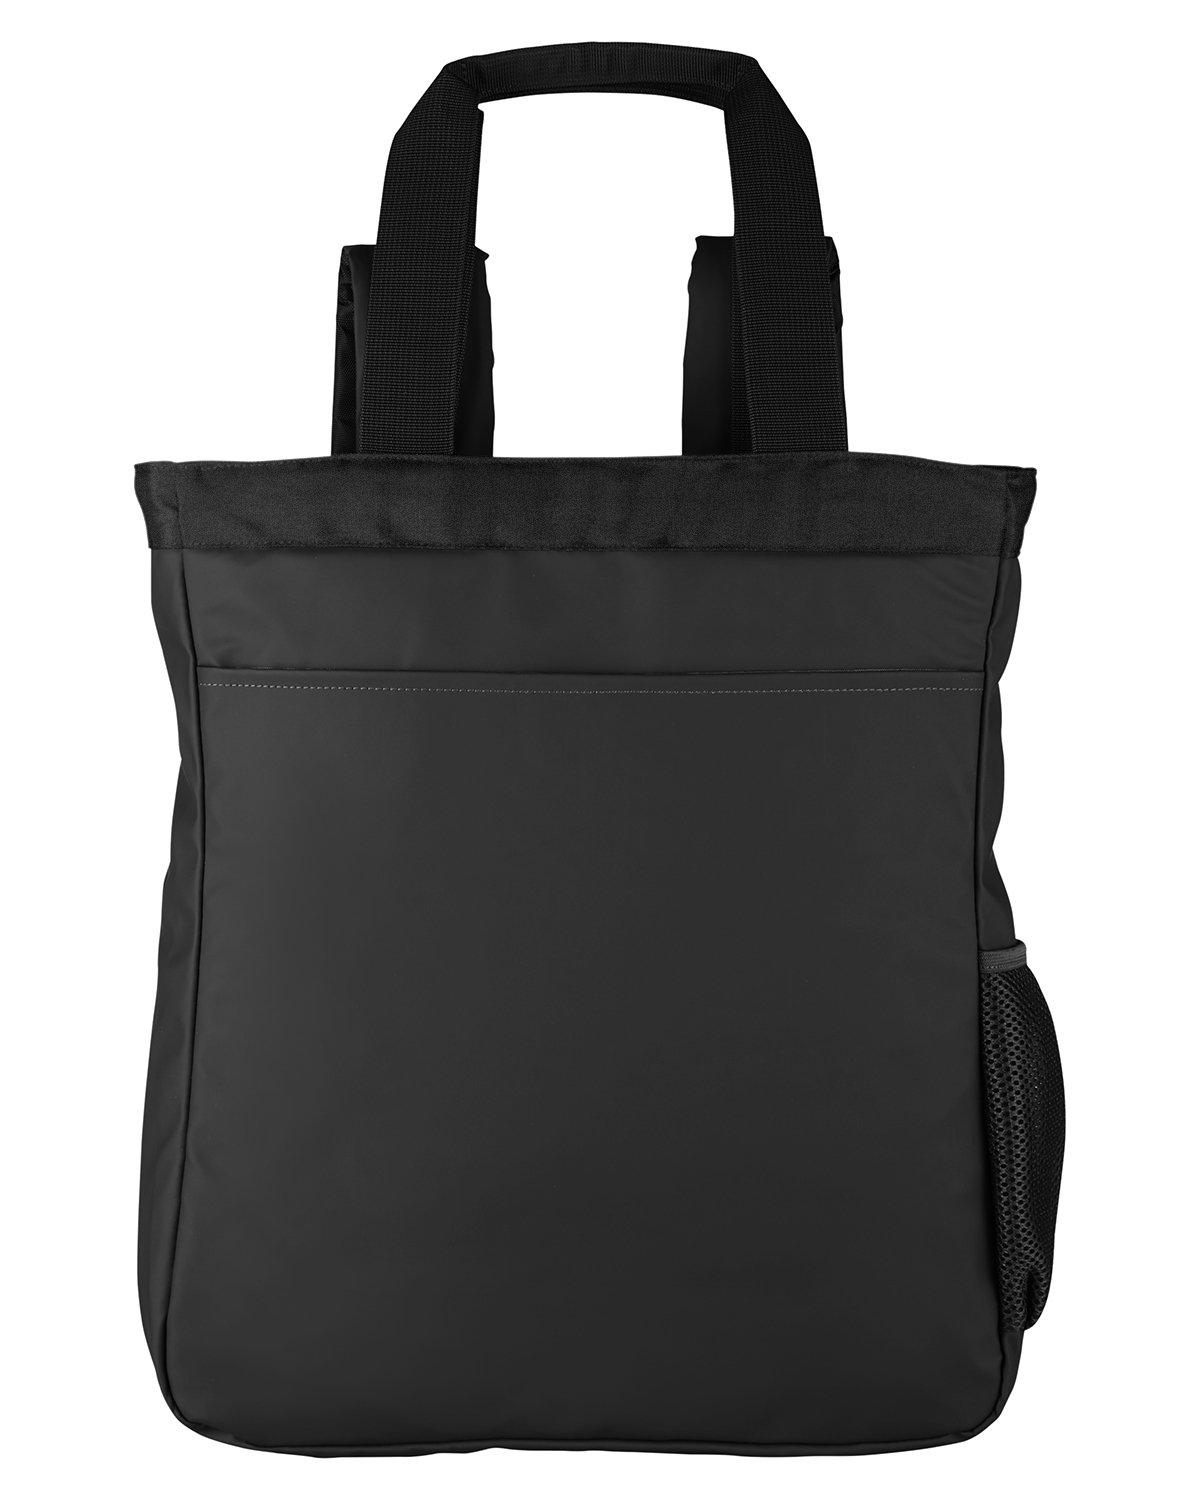 North End Convertible Backpack Tote BLACK 